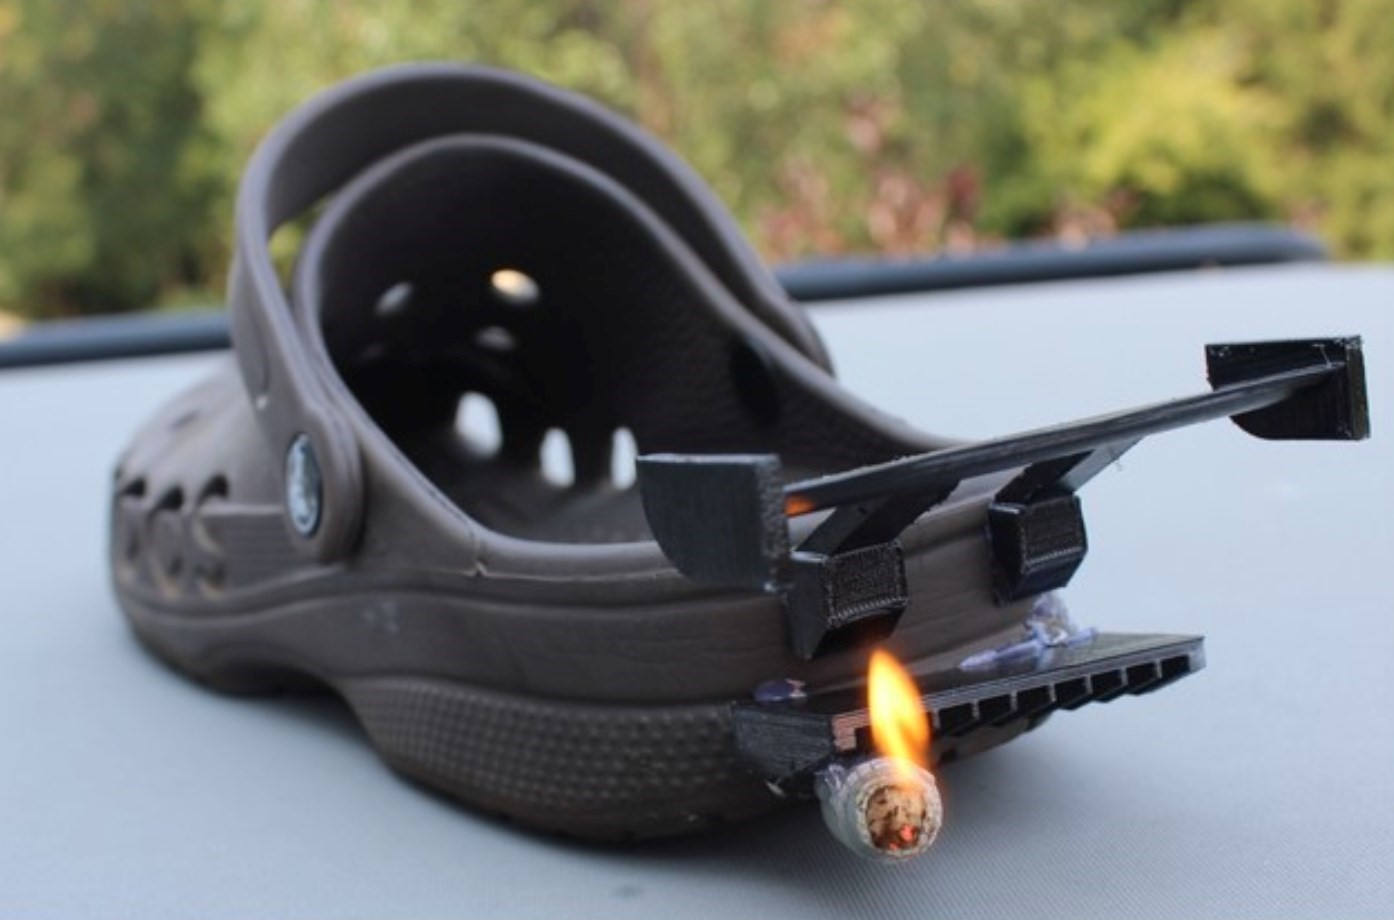 Increase your speed with spoilers and flaming exhaust pipes for your Crocs